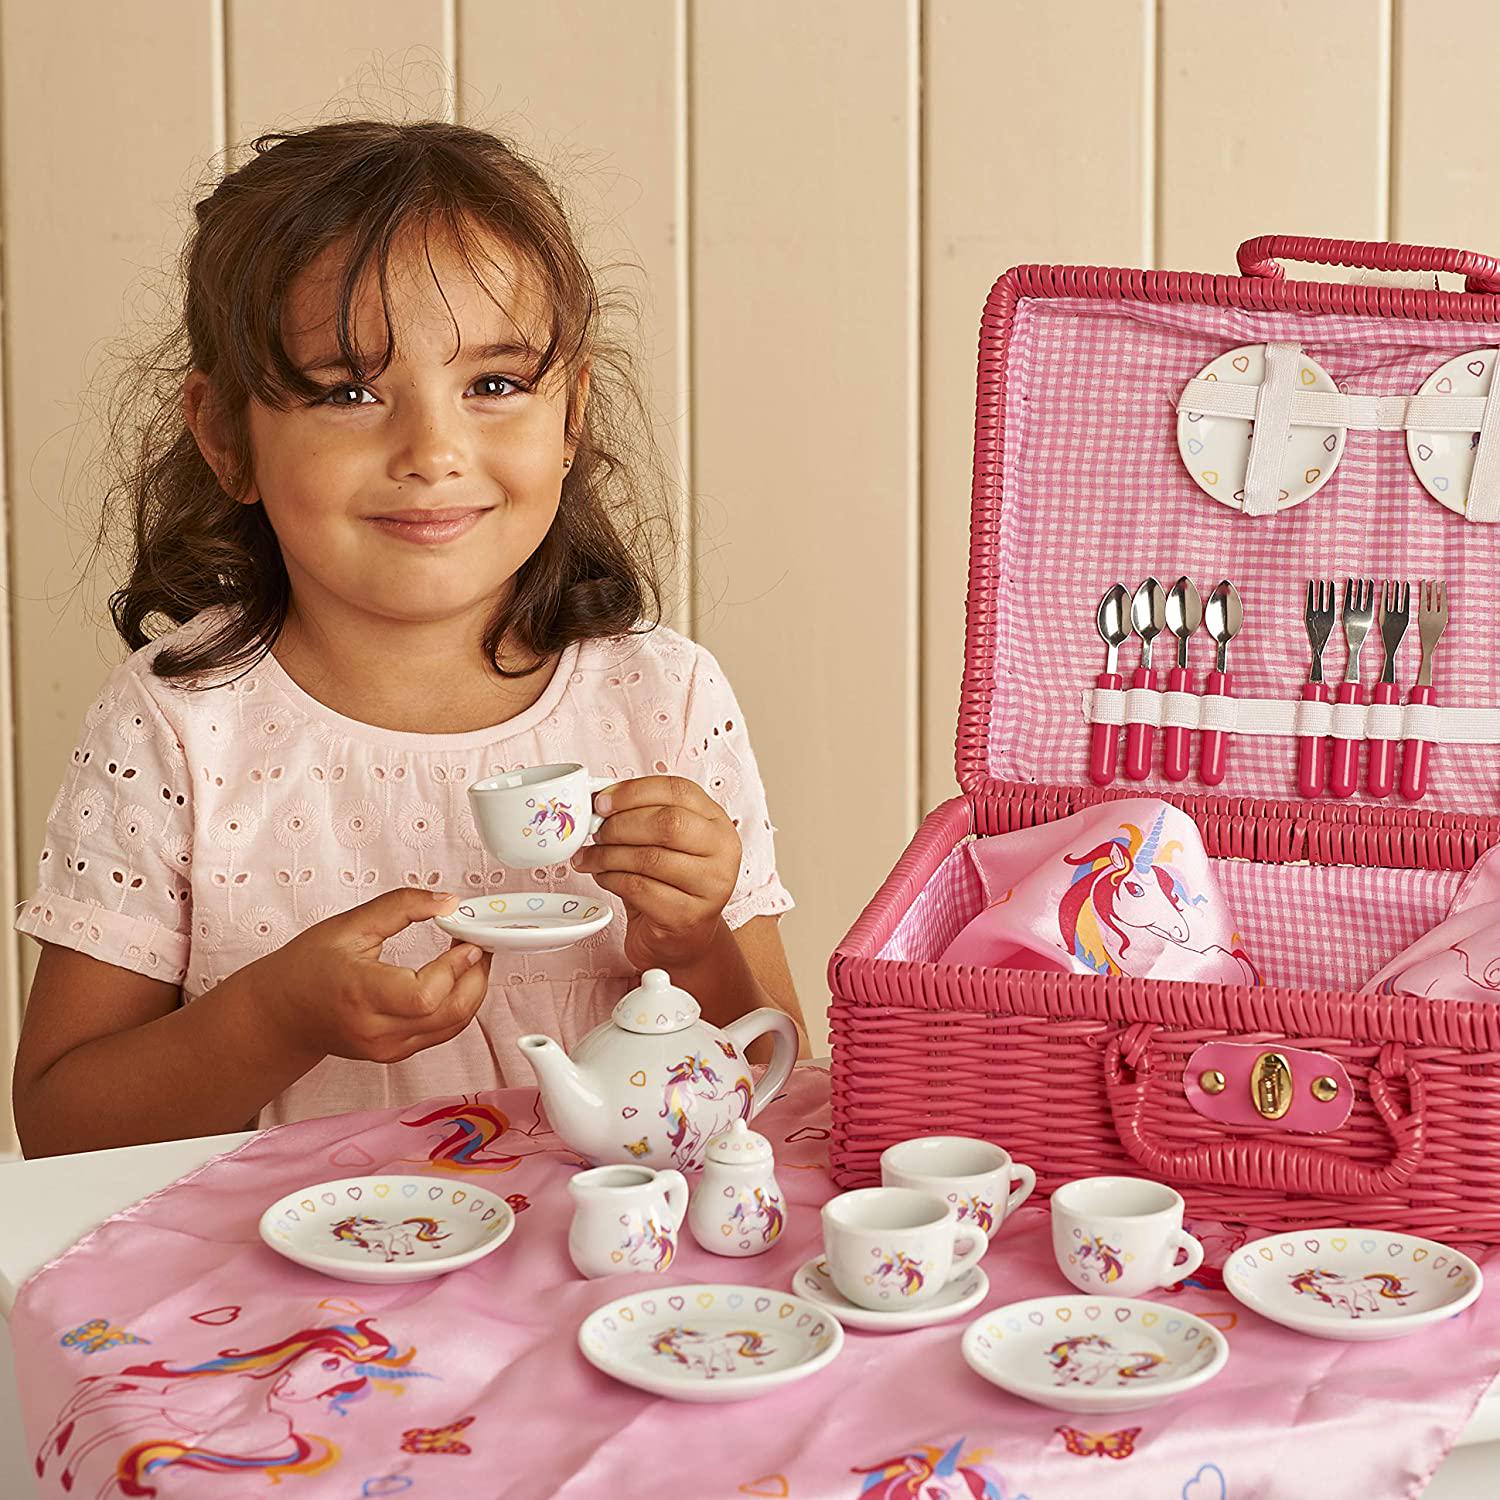 Wobbly Jelly, Wobbly Jelly - 'Magical Unicorn' China Tea Set and Picnic Basket - 31 pc Toy Tea Set or Children